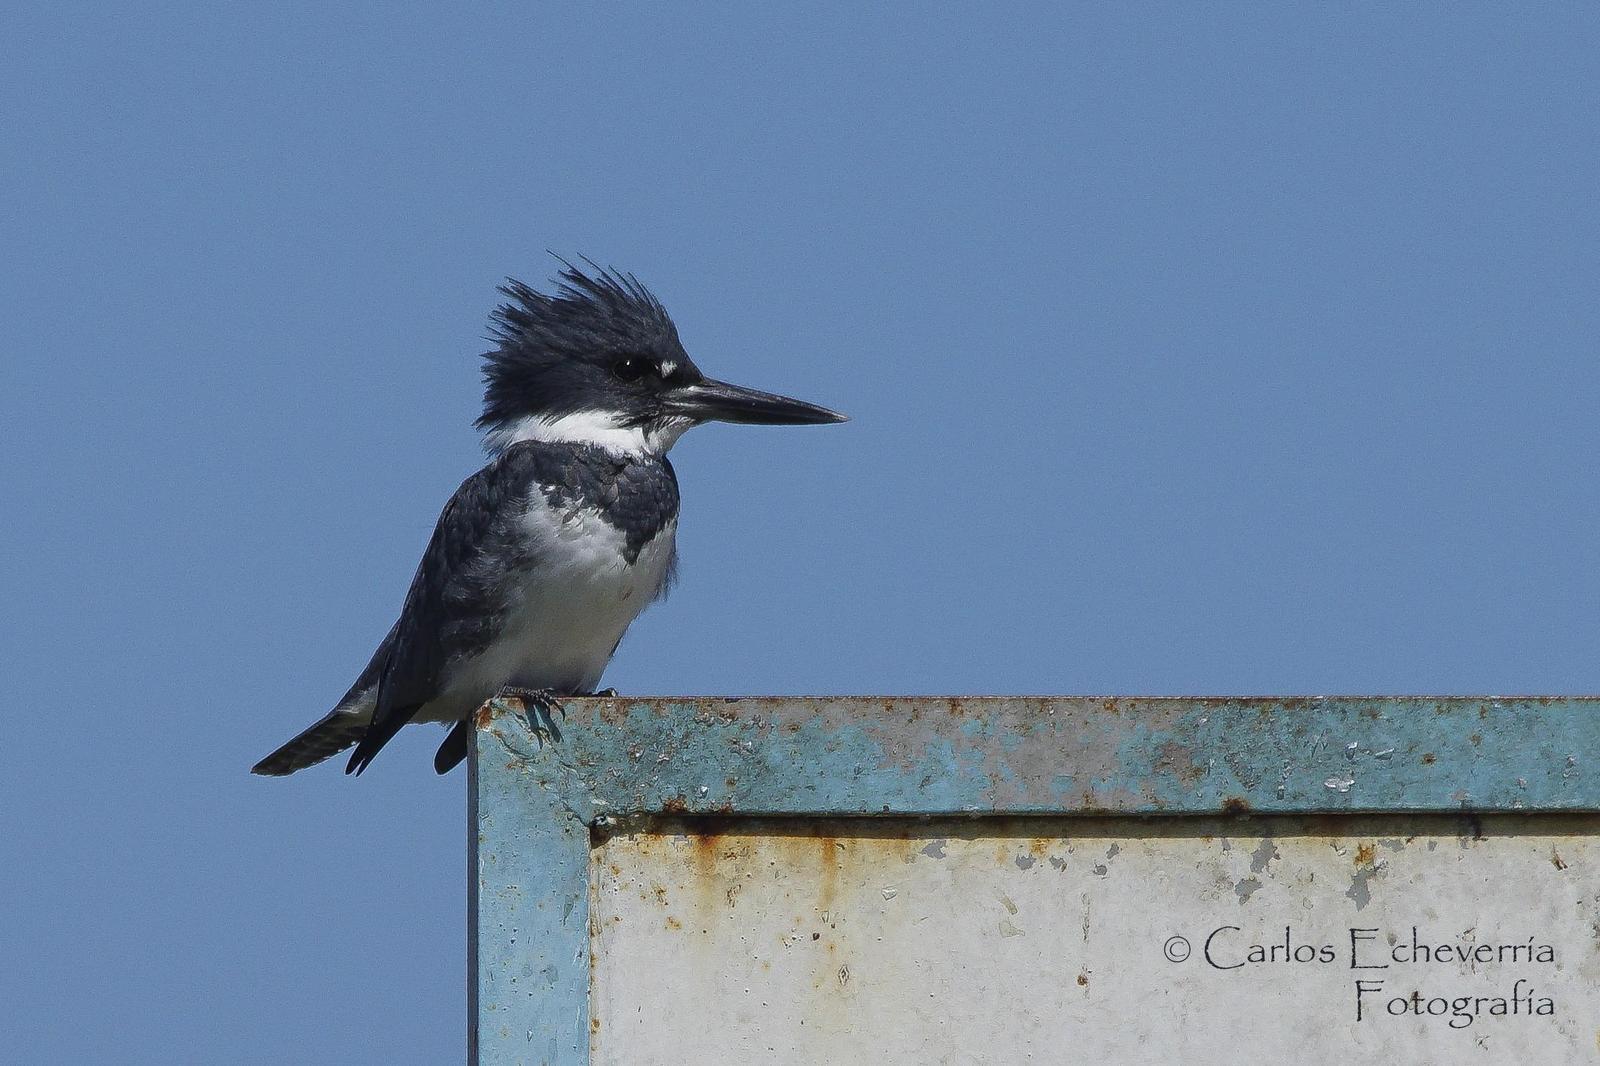 Belted Kingfisher Photo by Carlos Echeverría